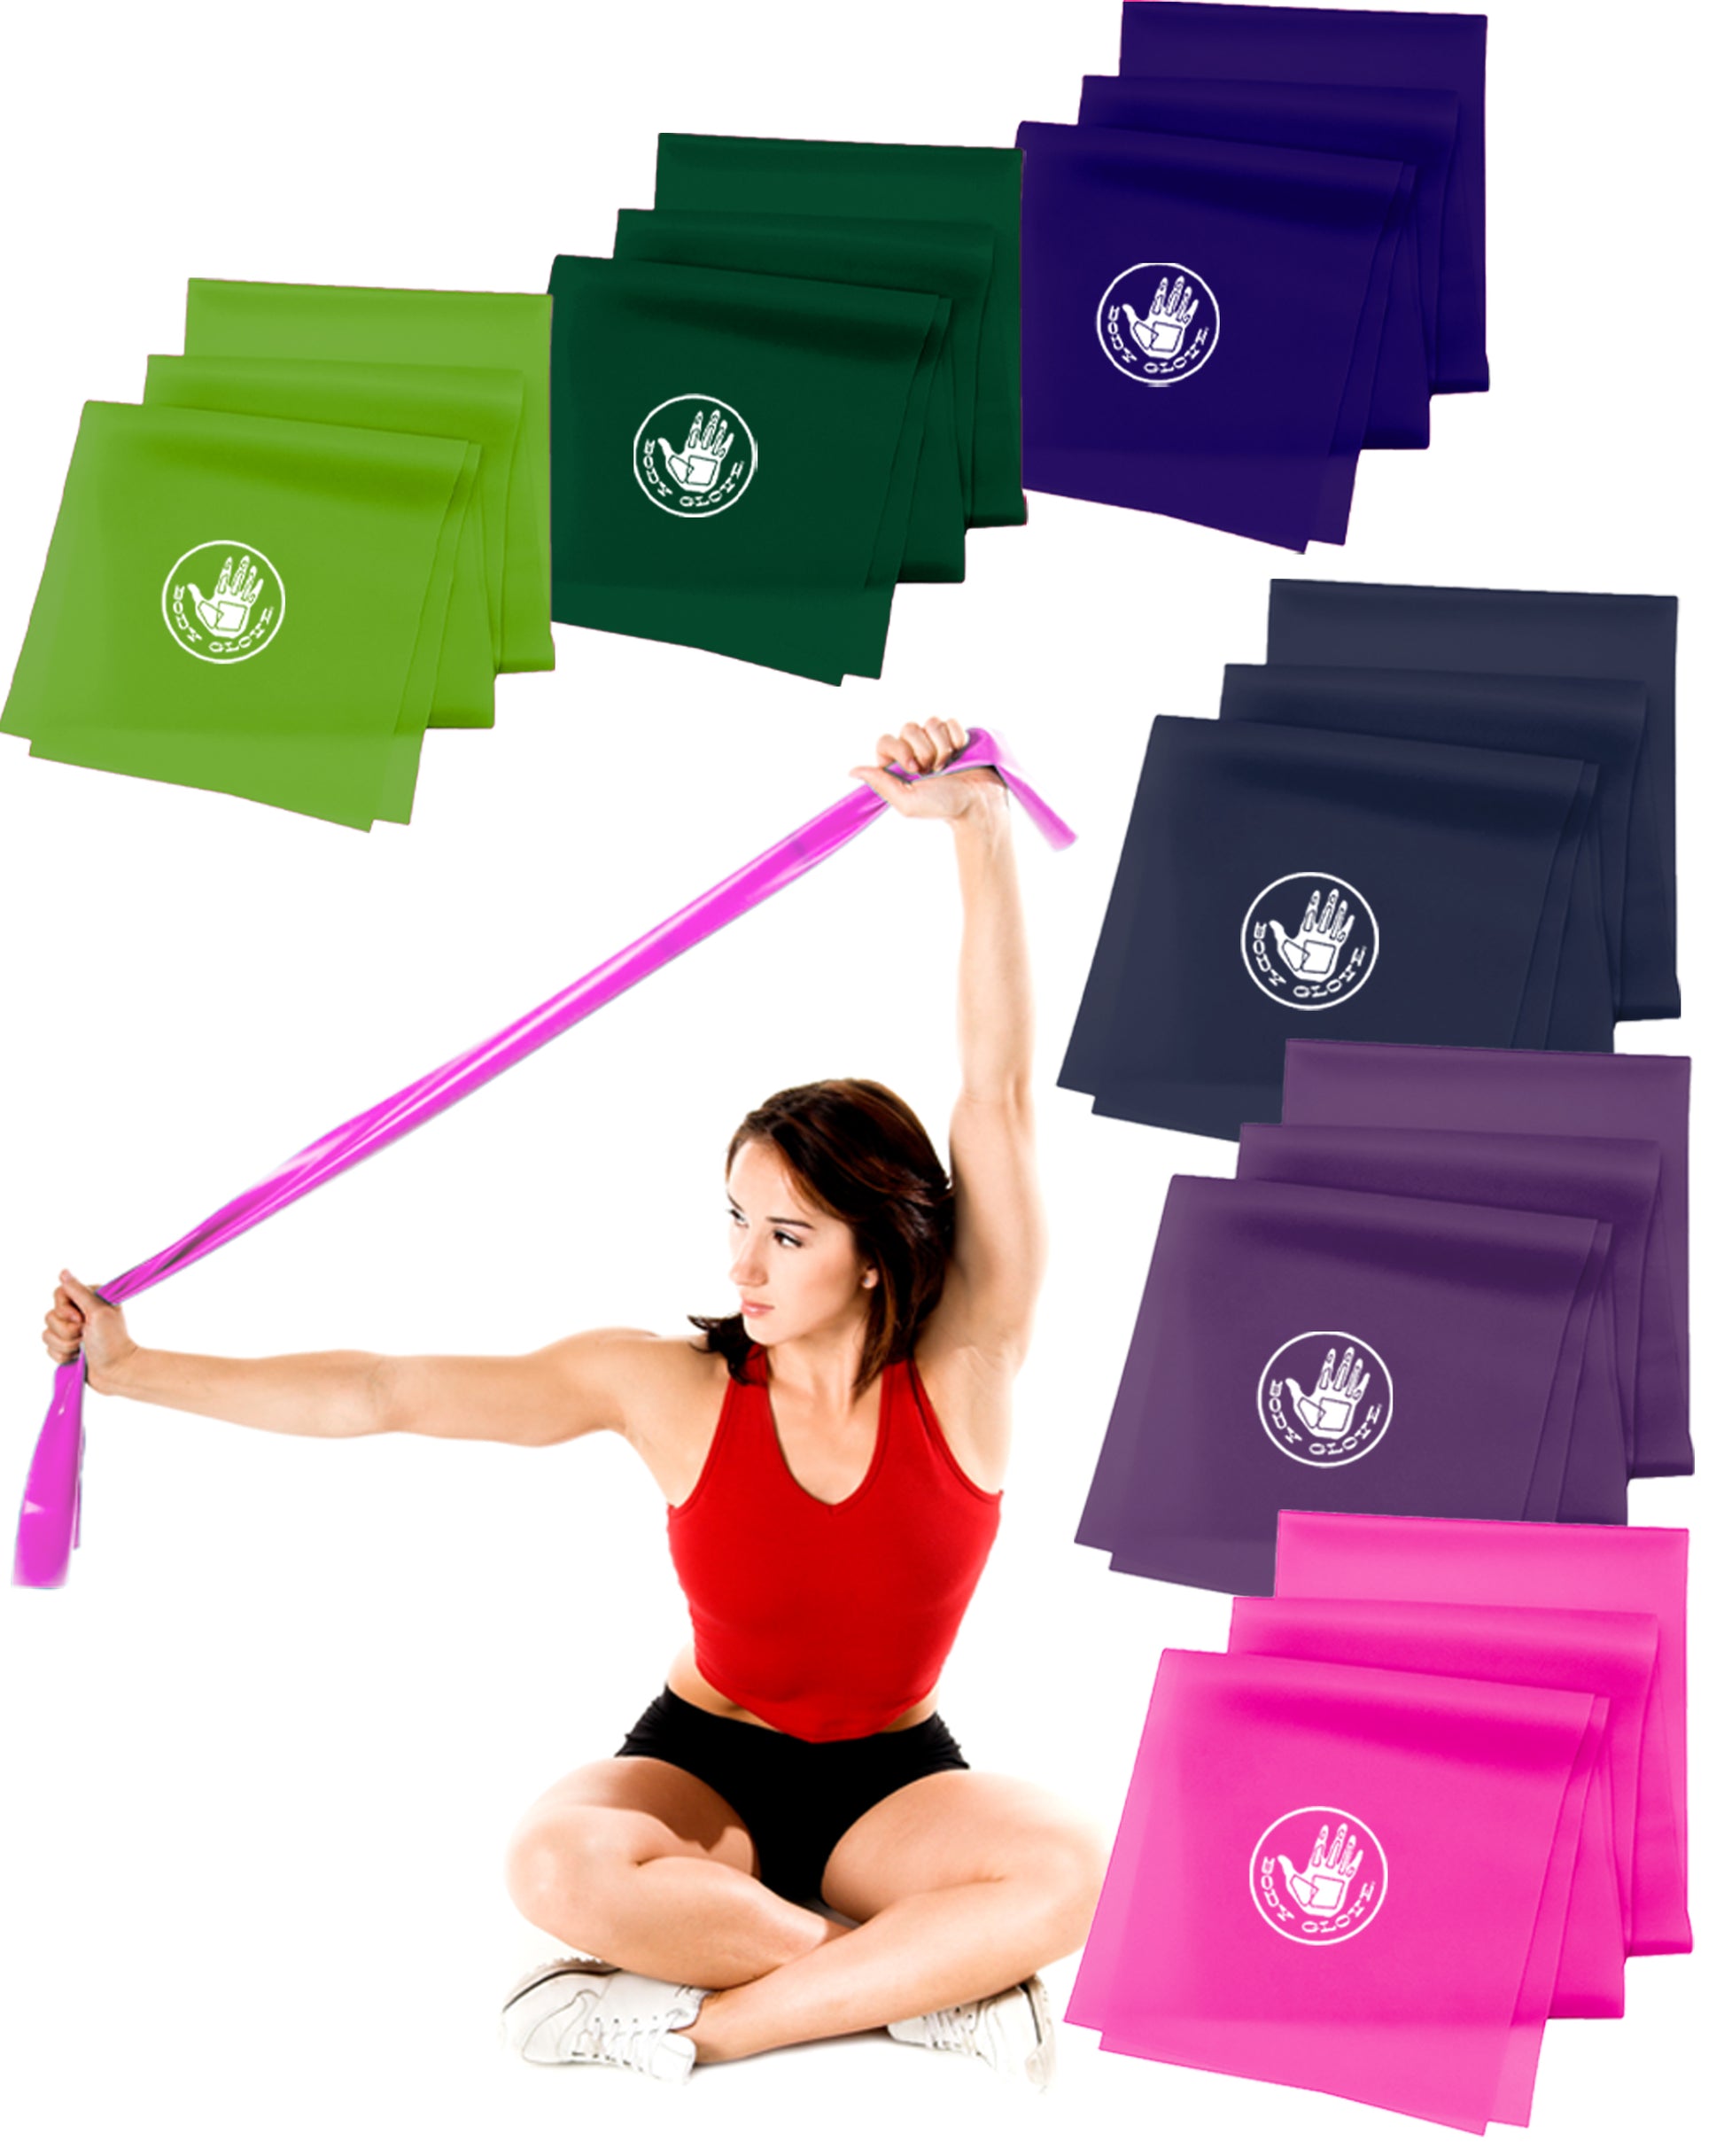 Body Glove 3 Pack Flat Resistance Bands For Upper and Lower Body - home • office • health